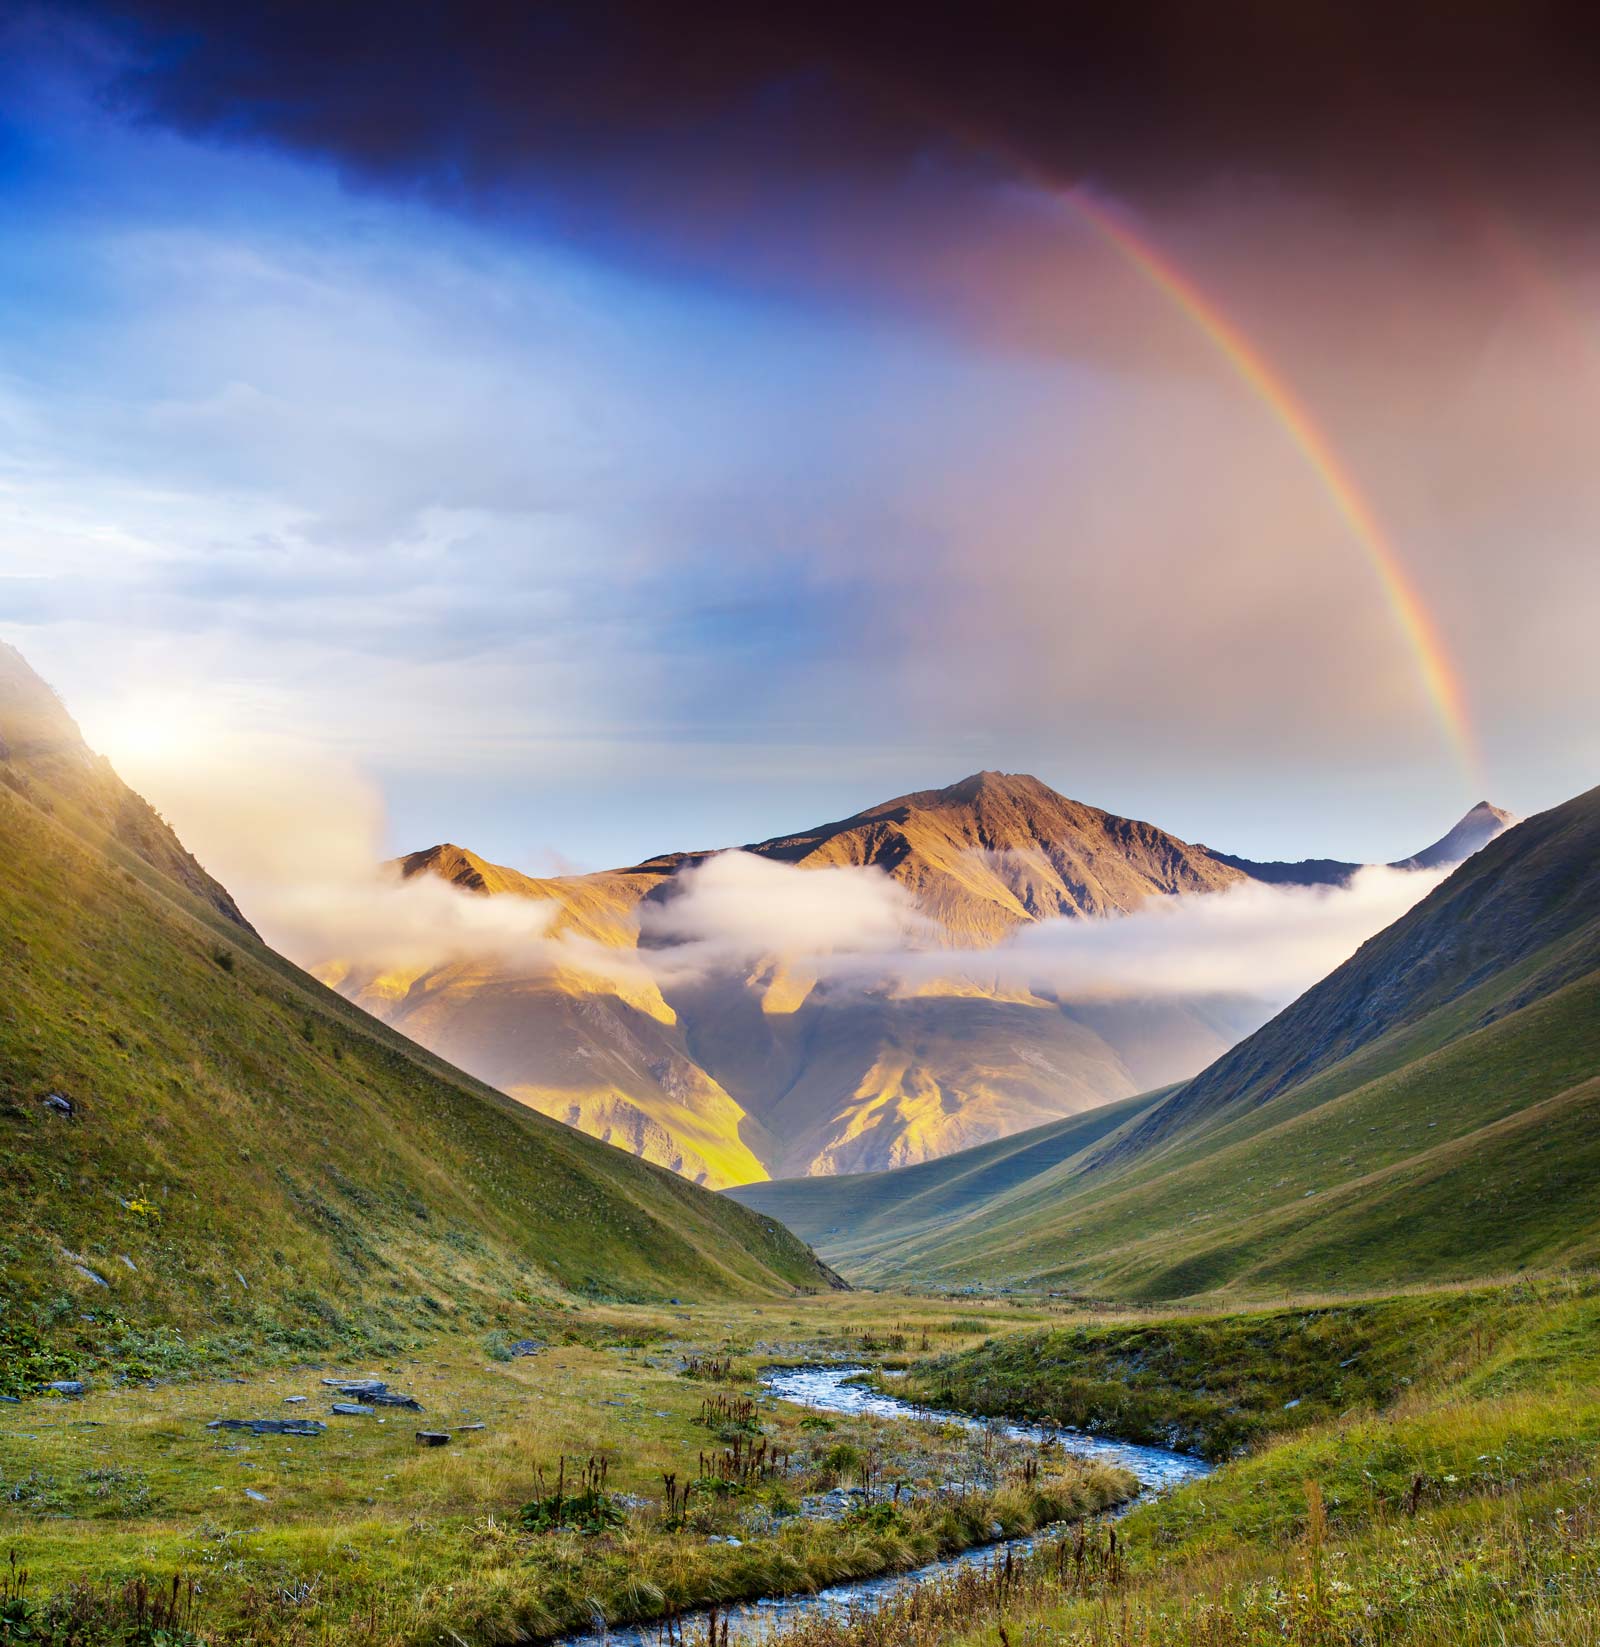 Wallpaper mural of a valley rainbow for use in interior design.